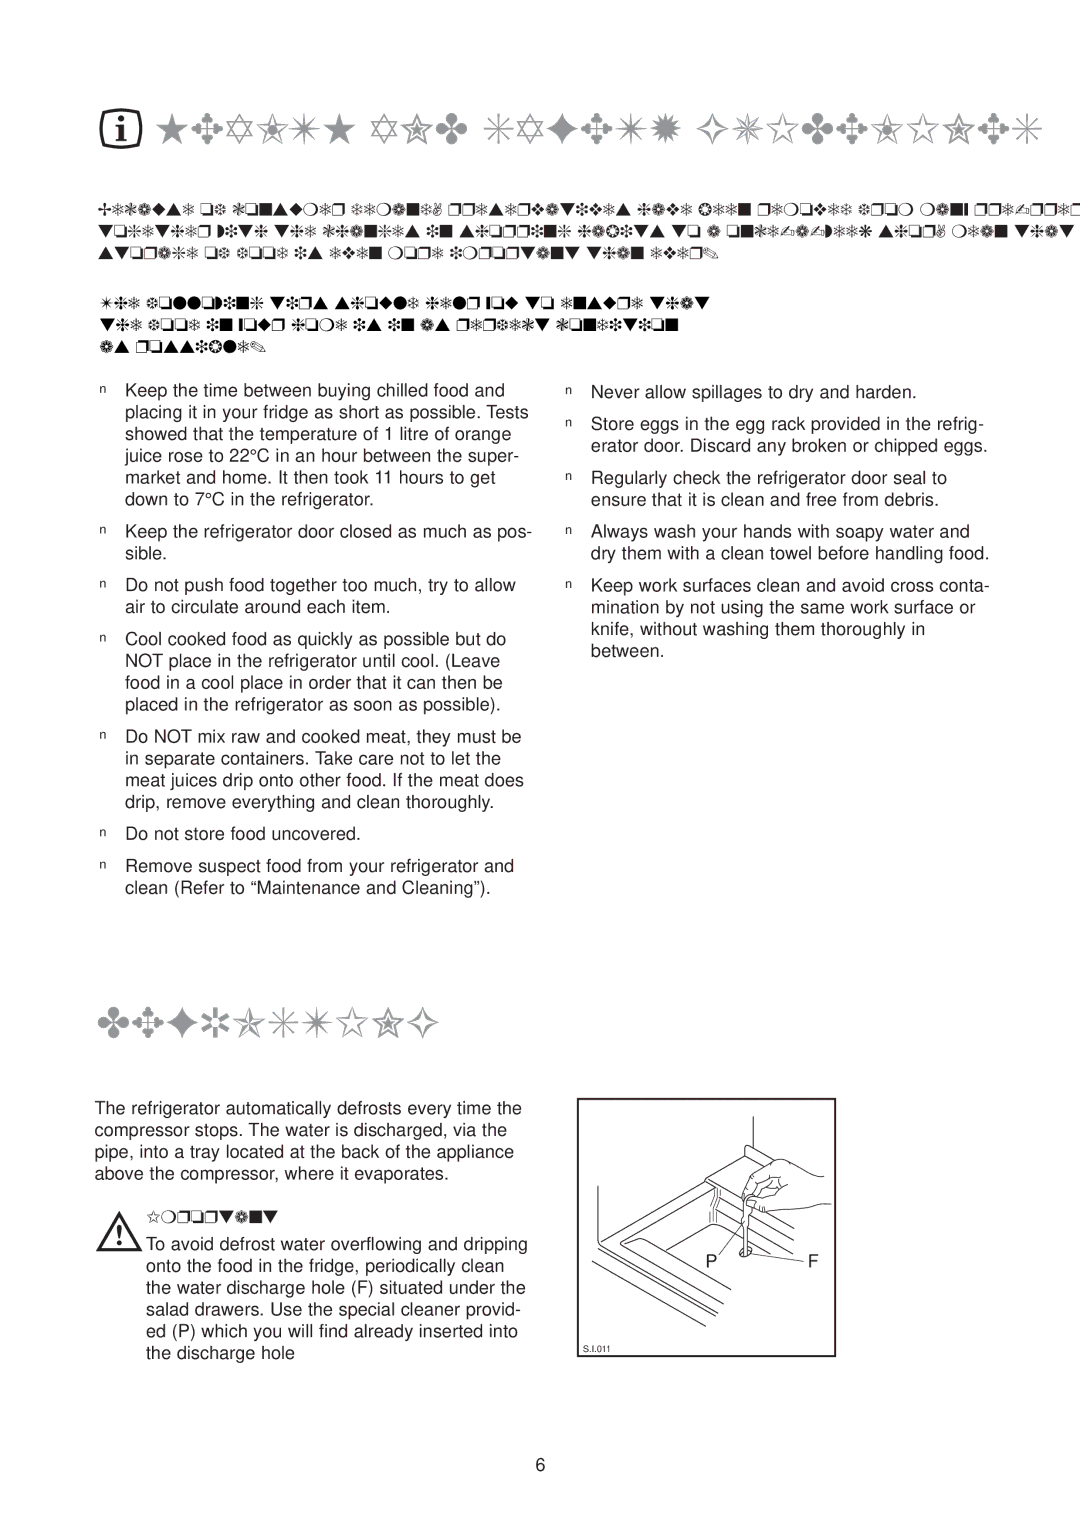 Zanussi ZU 9154 manual Health and Safety Guidelines, Defrosting 